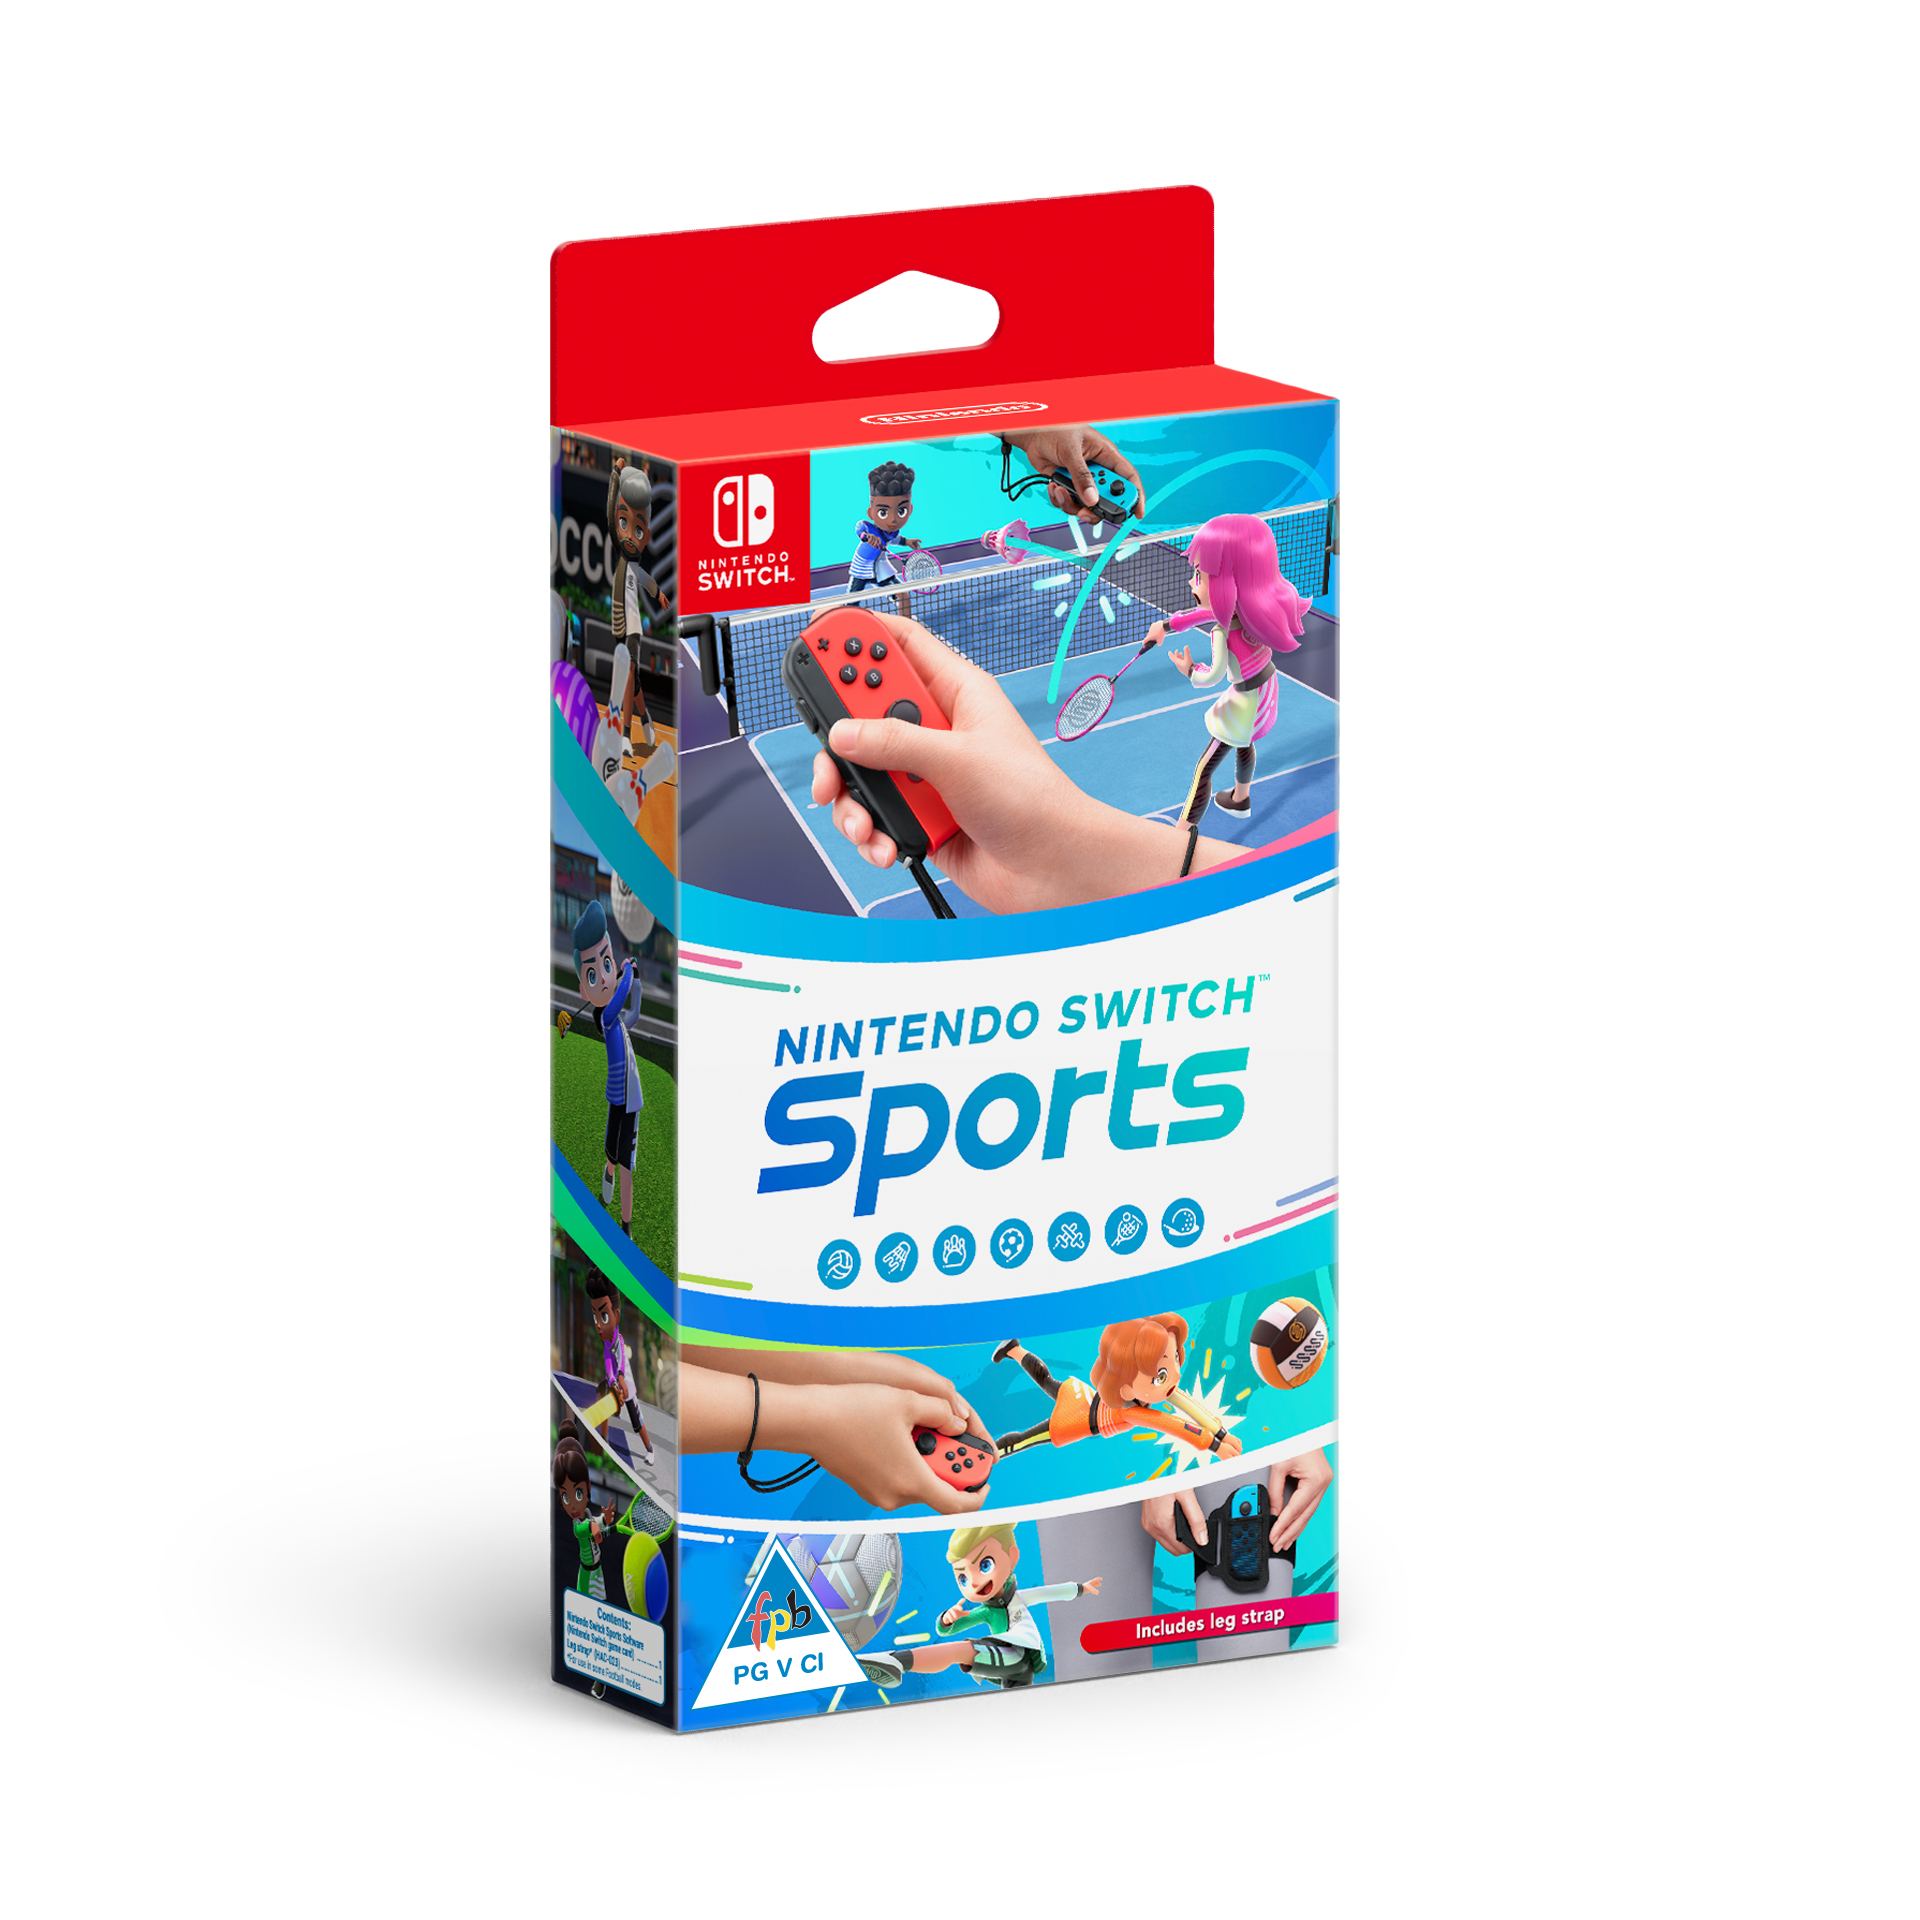 Nintendo Switch Sports Update Adds New Volleyball Moves, Leg Strap Options